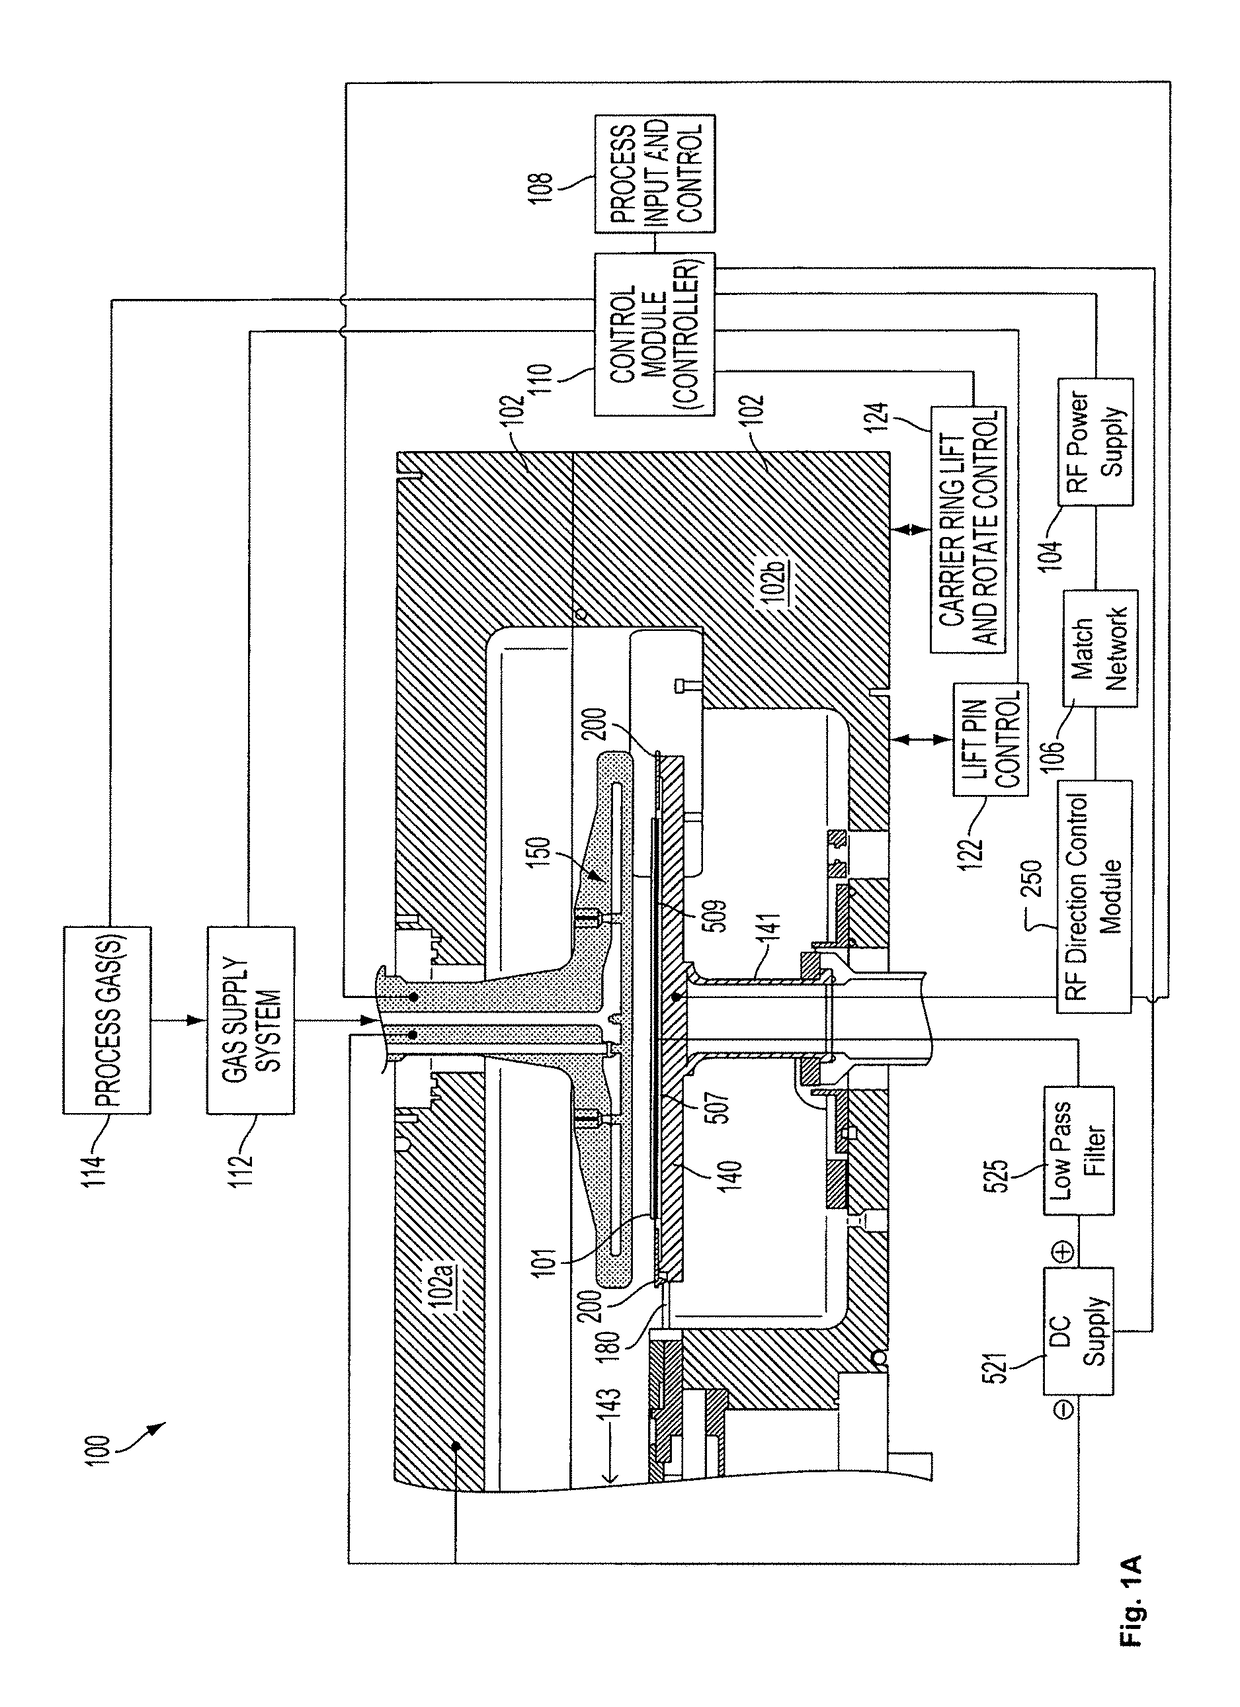 Systems and methods for detection of plasma instability by electrical measurement